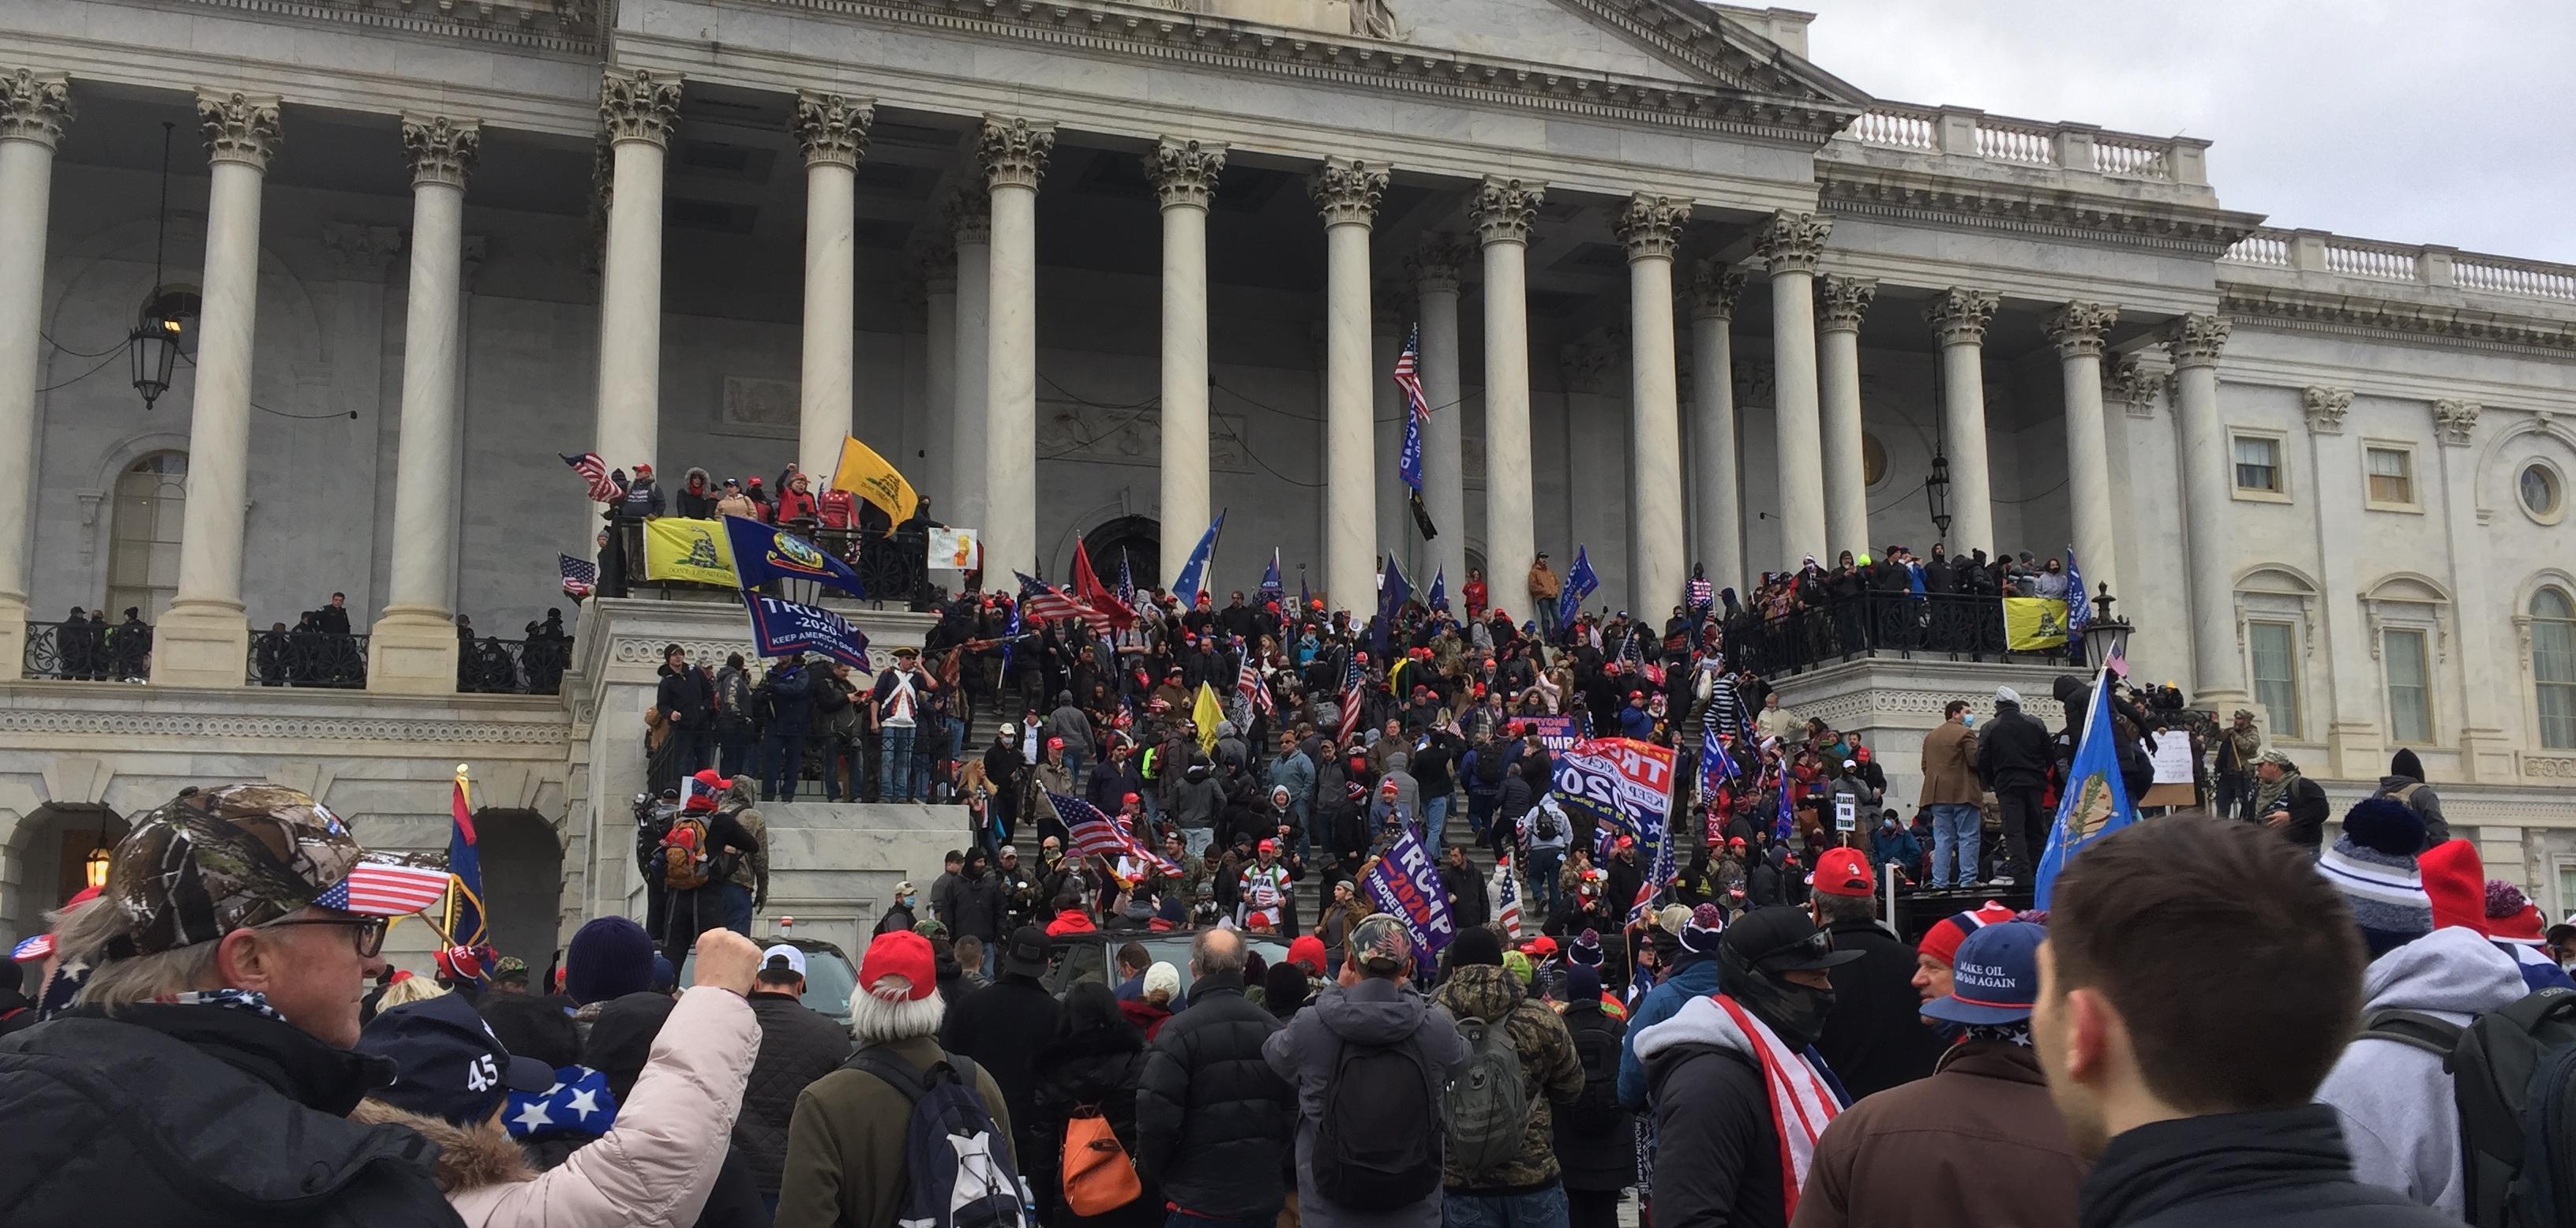 A group of right wing protesters outside the Capitol building in Washington DC. They are climbing the Stairs of the building.